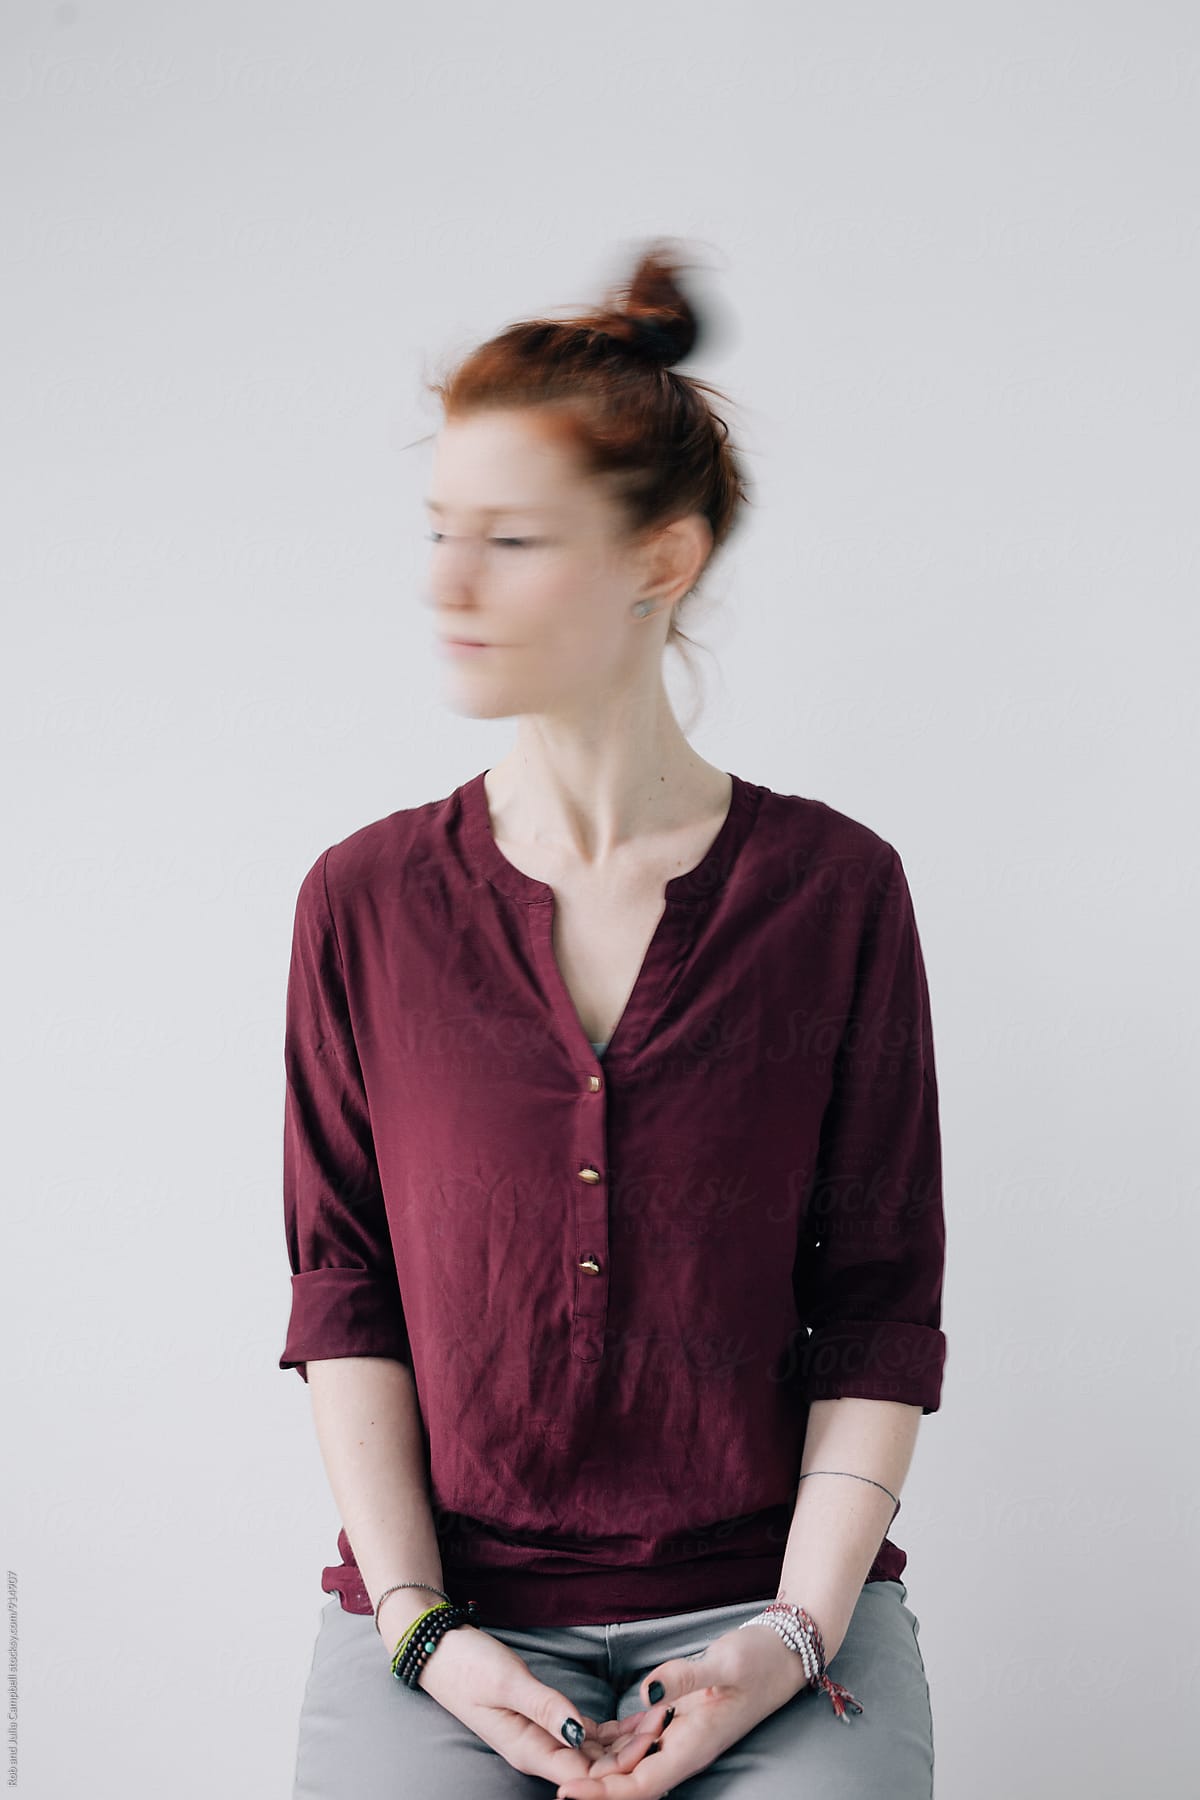 Motion blur portrait of red head woman on simple background